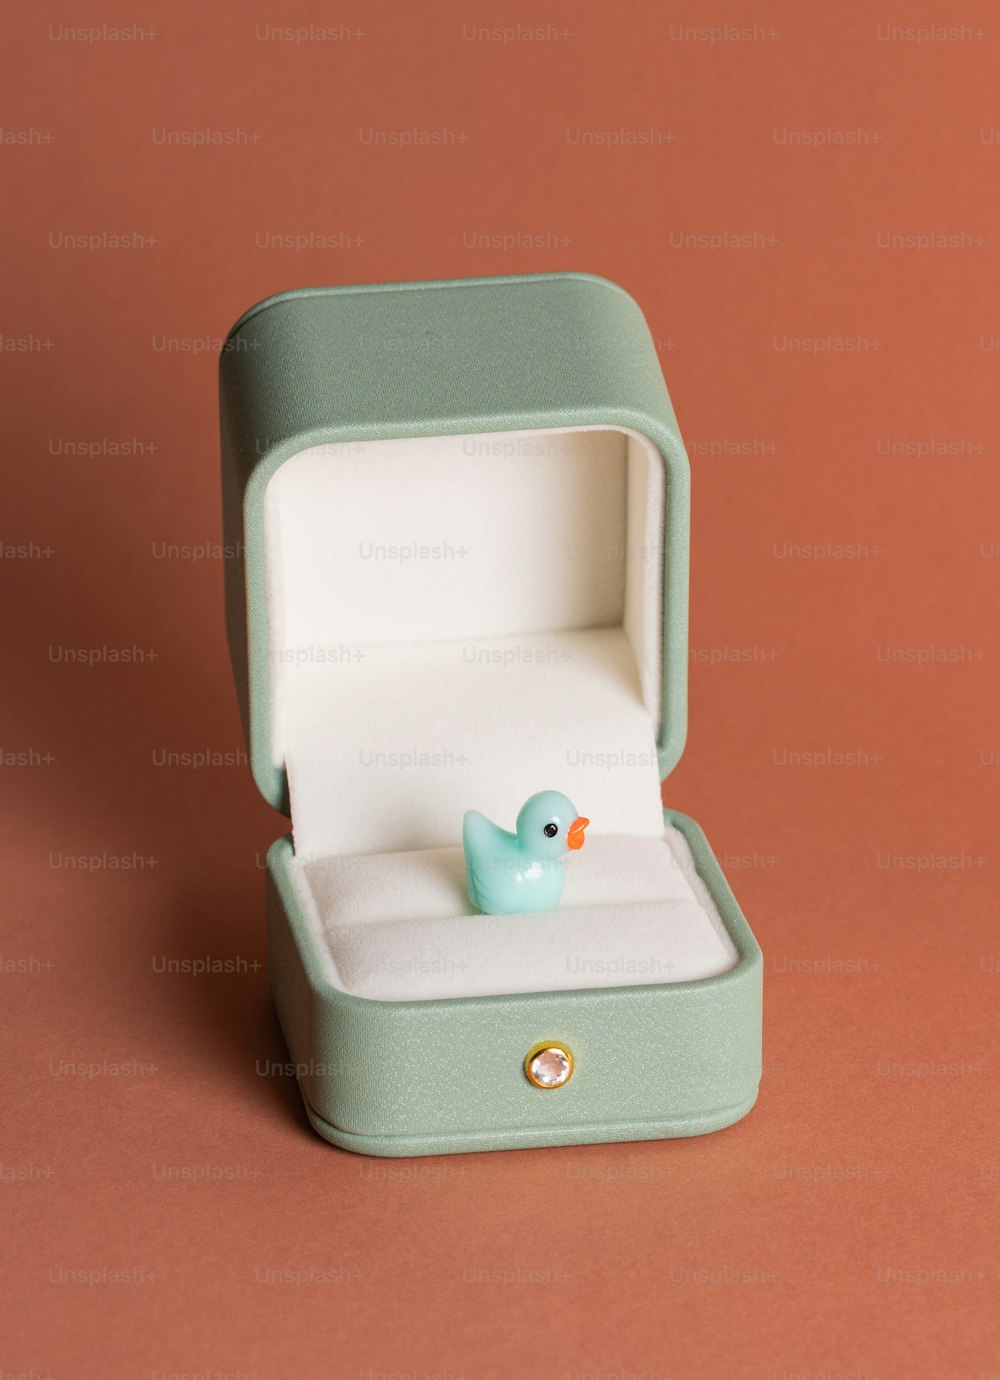 a small blue rubber duck in a green box